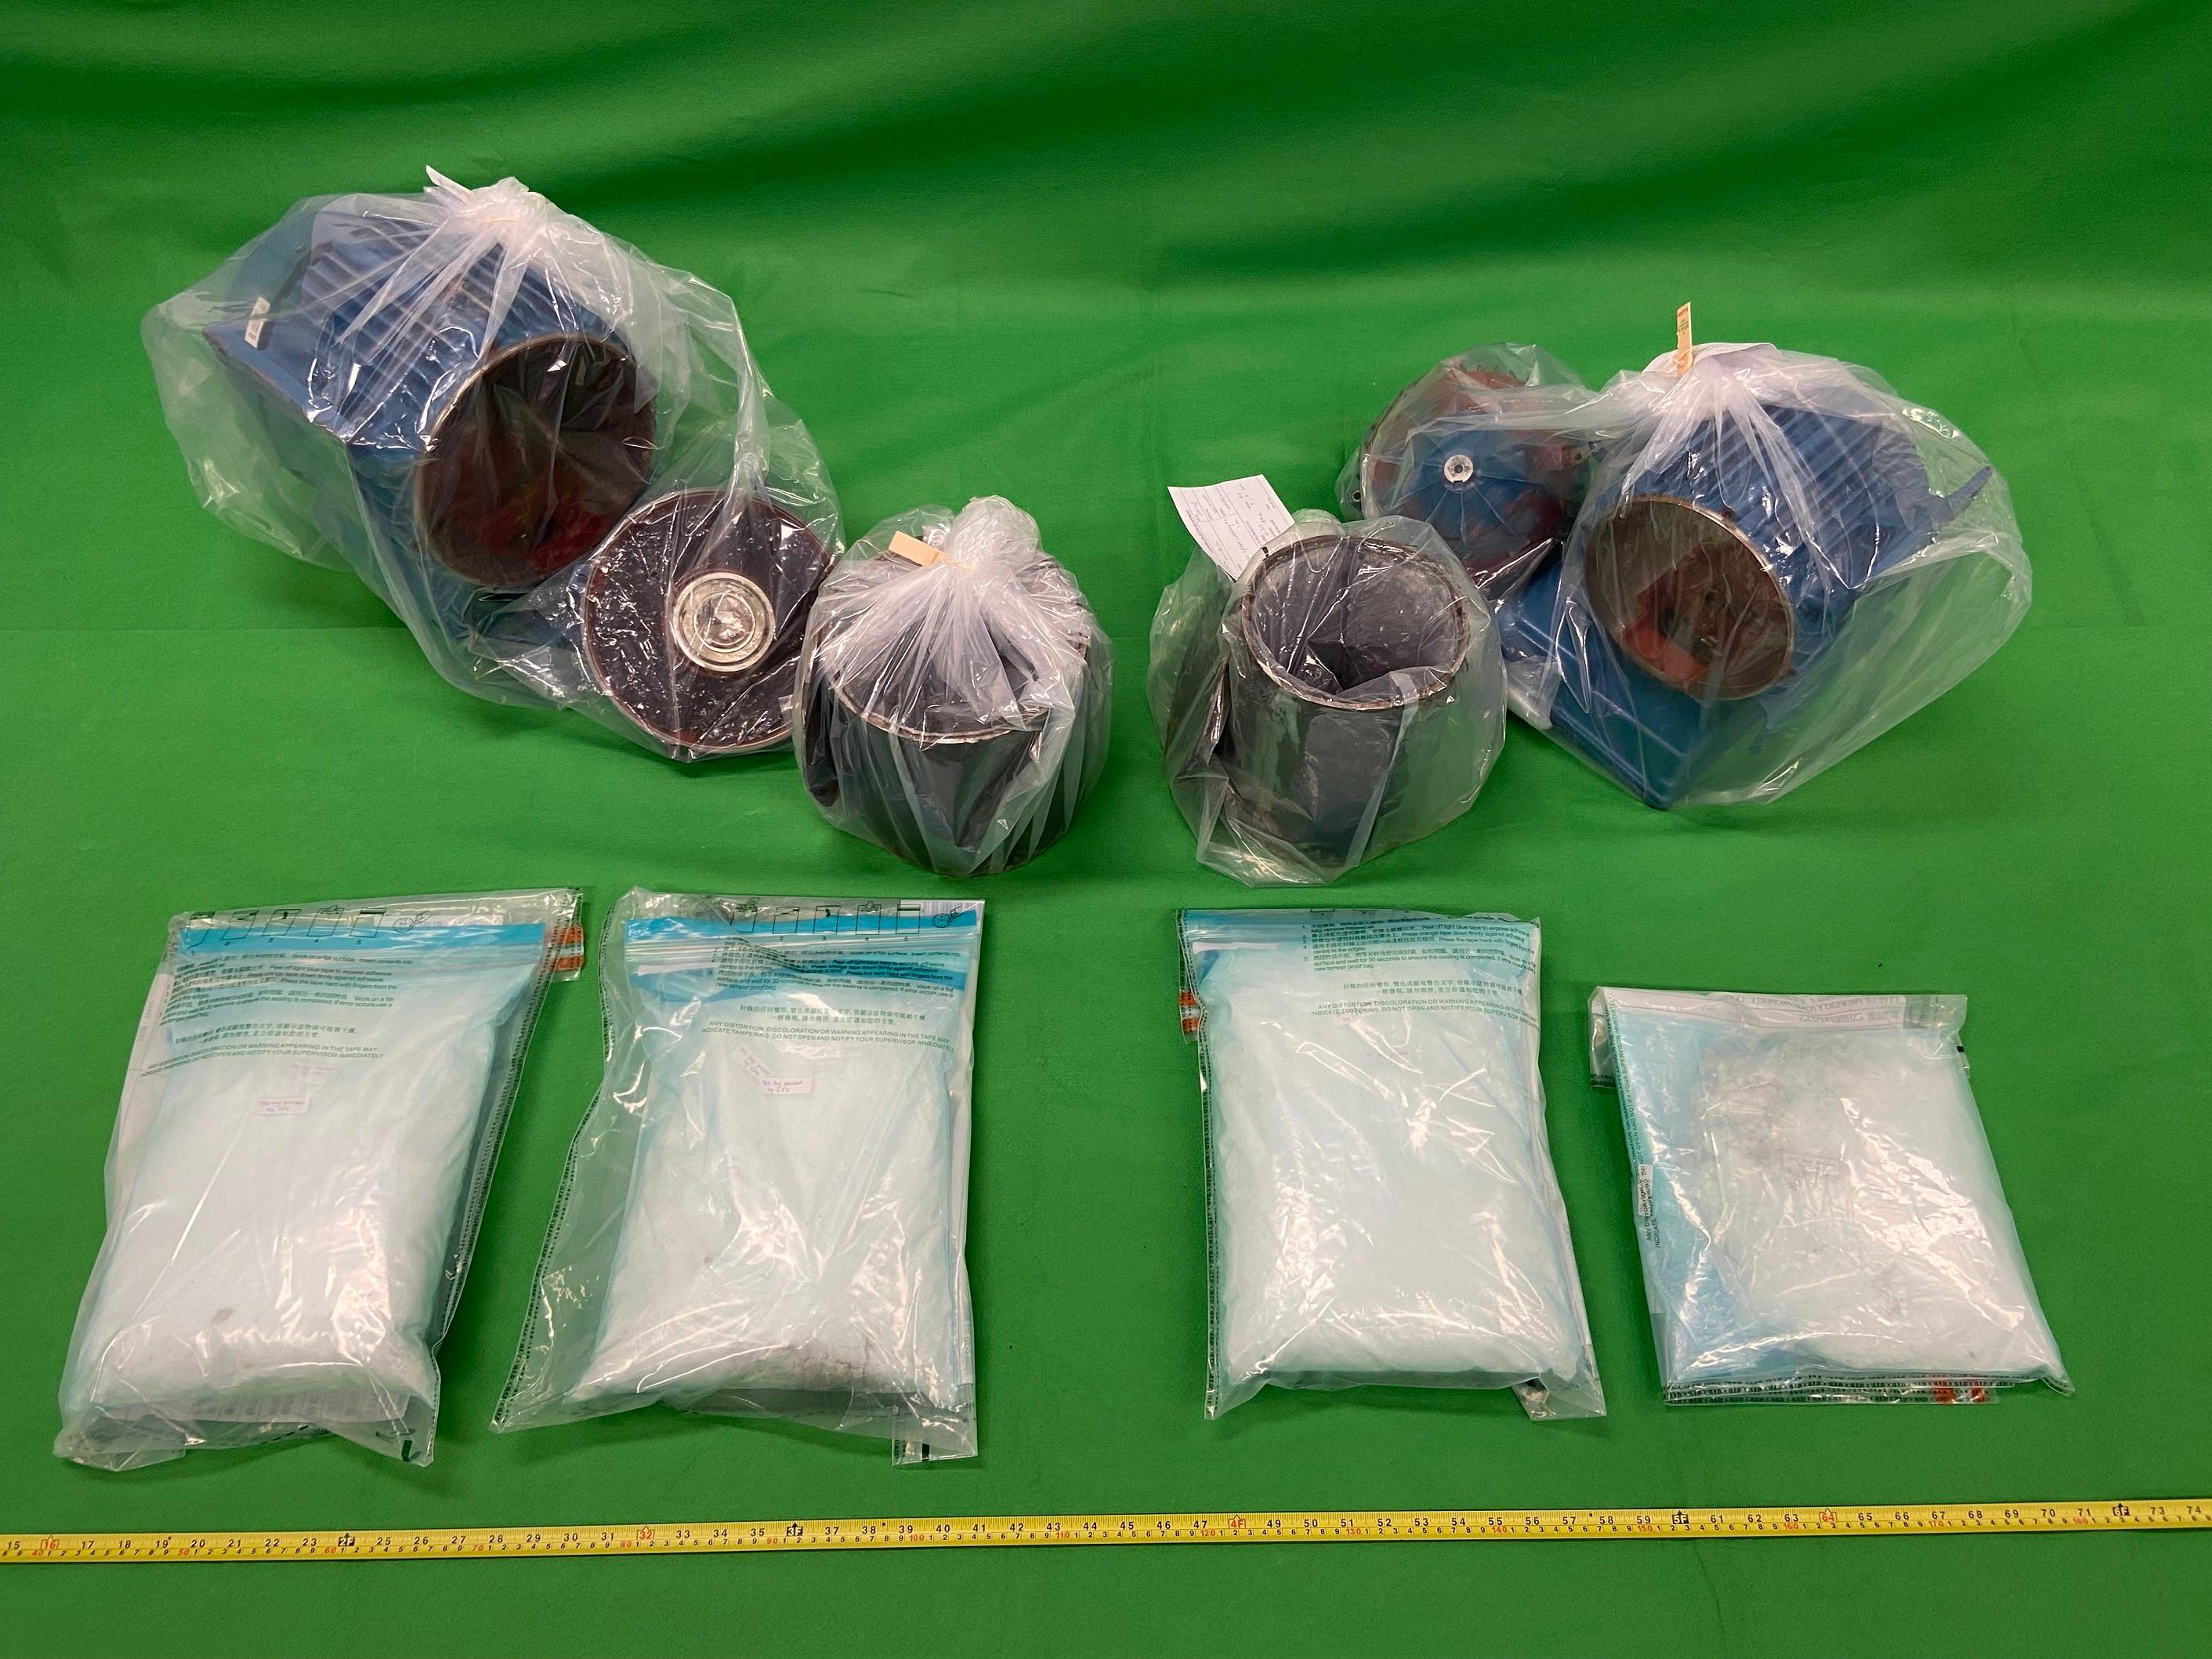 Hong Kong Customs seized about 11 kilograms of suspected cocaine with an estimated market value of about $9.6 million at Hong Kong International Airport on April 9. Photo shows the suspected cocaine seized and the electronic engines used to conceal the drugs.